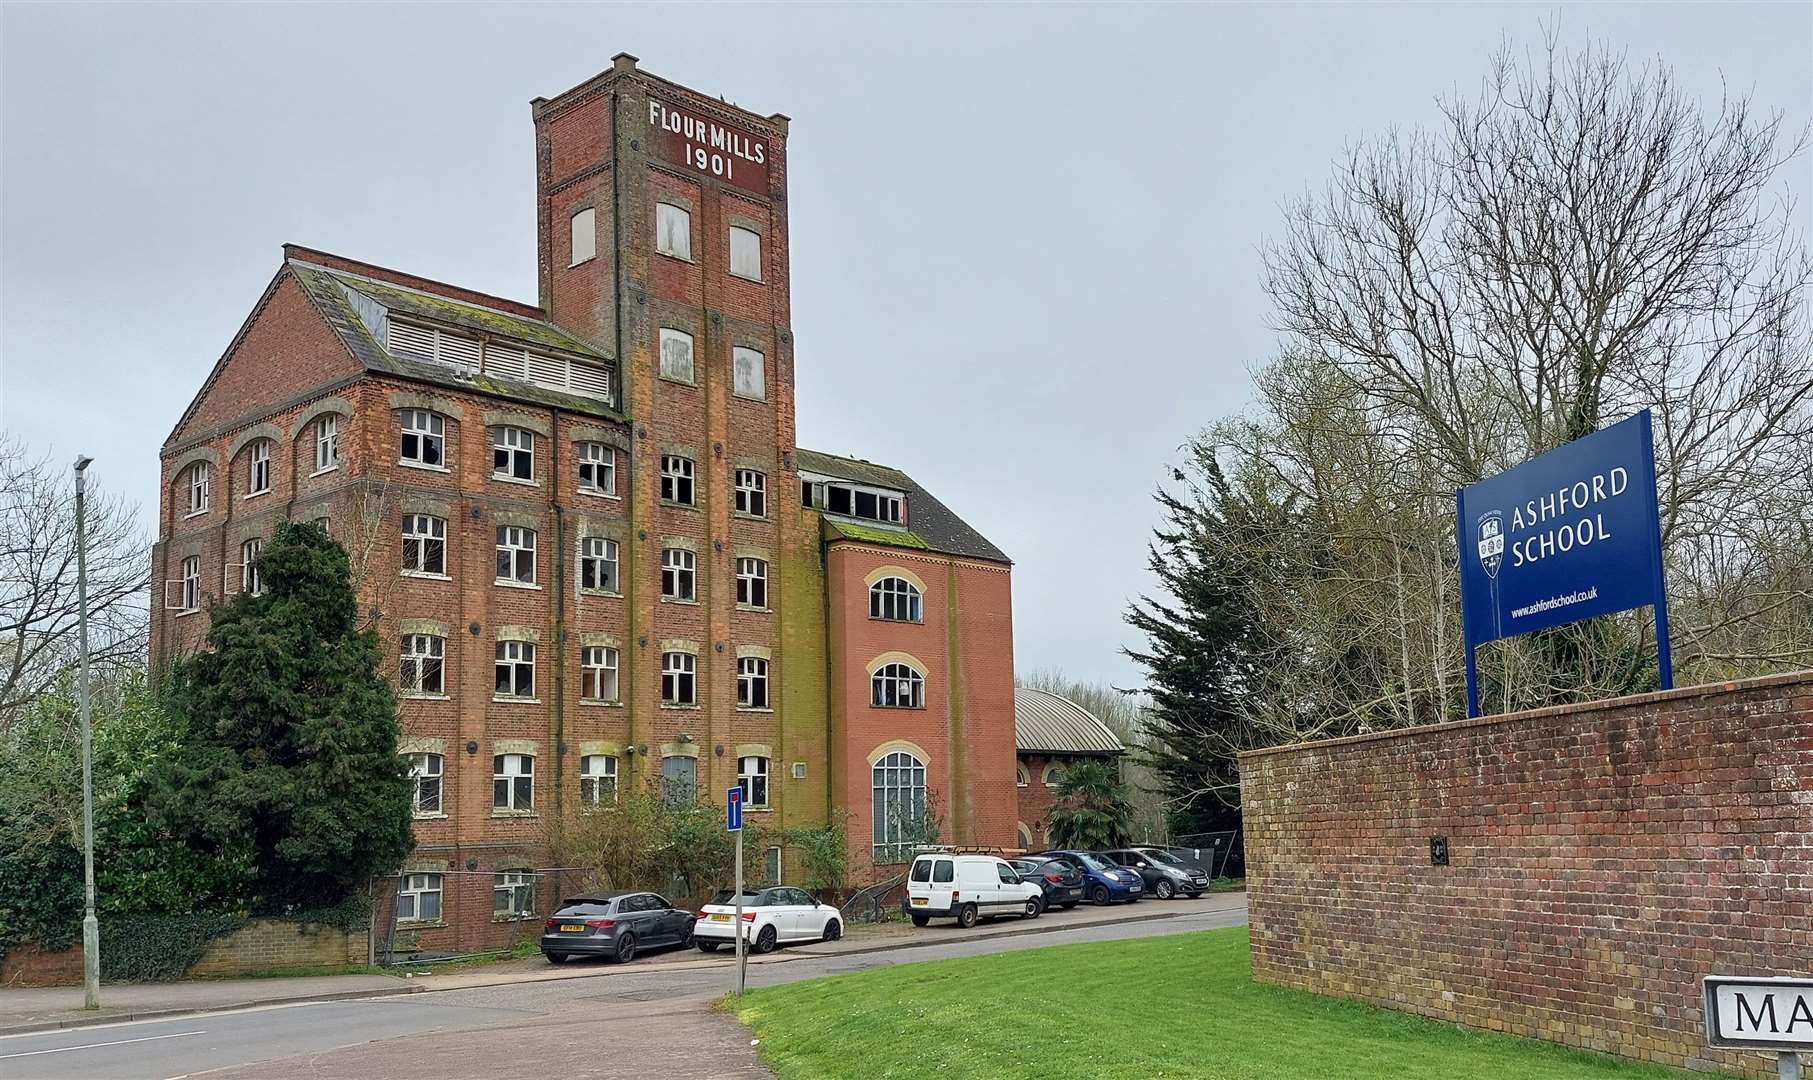 The former flour mill in East Hill is set to be turned into flats; it was previously owned by Ashford School